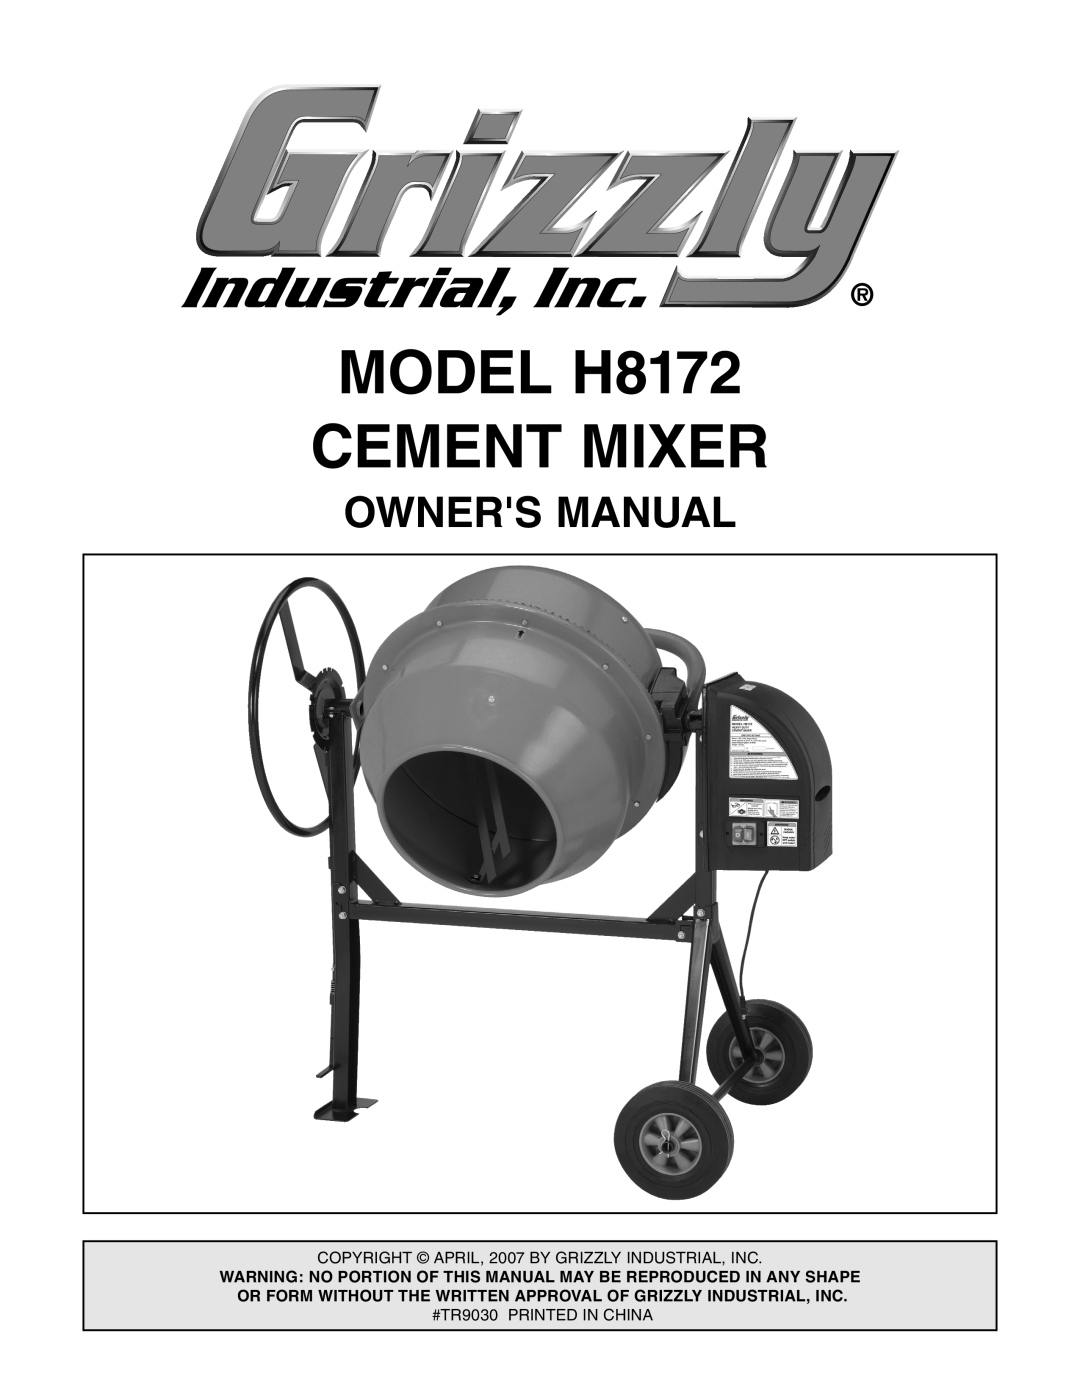 Grizzly owner manual MODEL H8172 CEMENT MIXER 